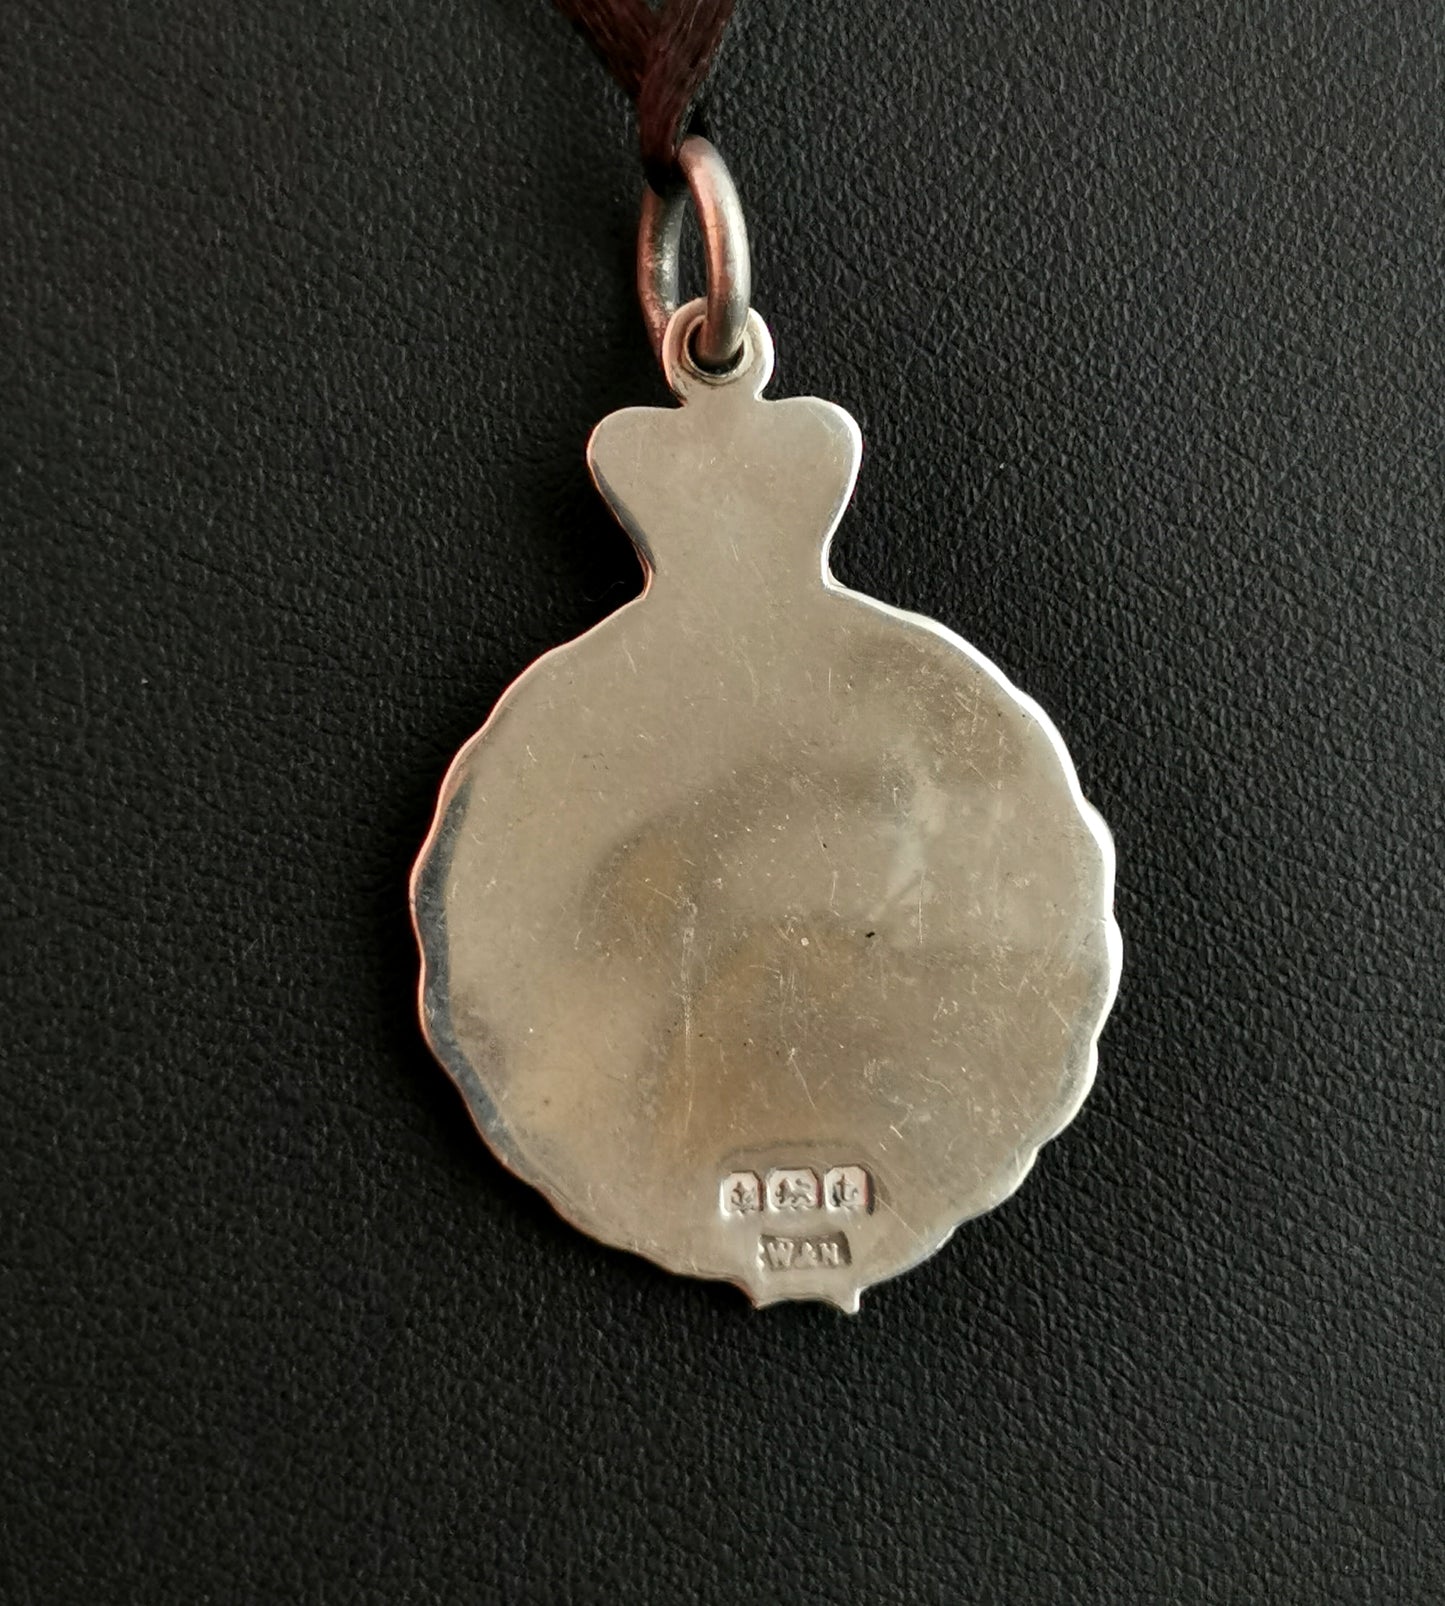 Antique sterling silver watch fob, pendant